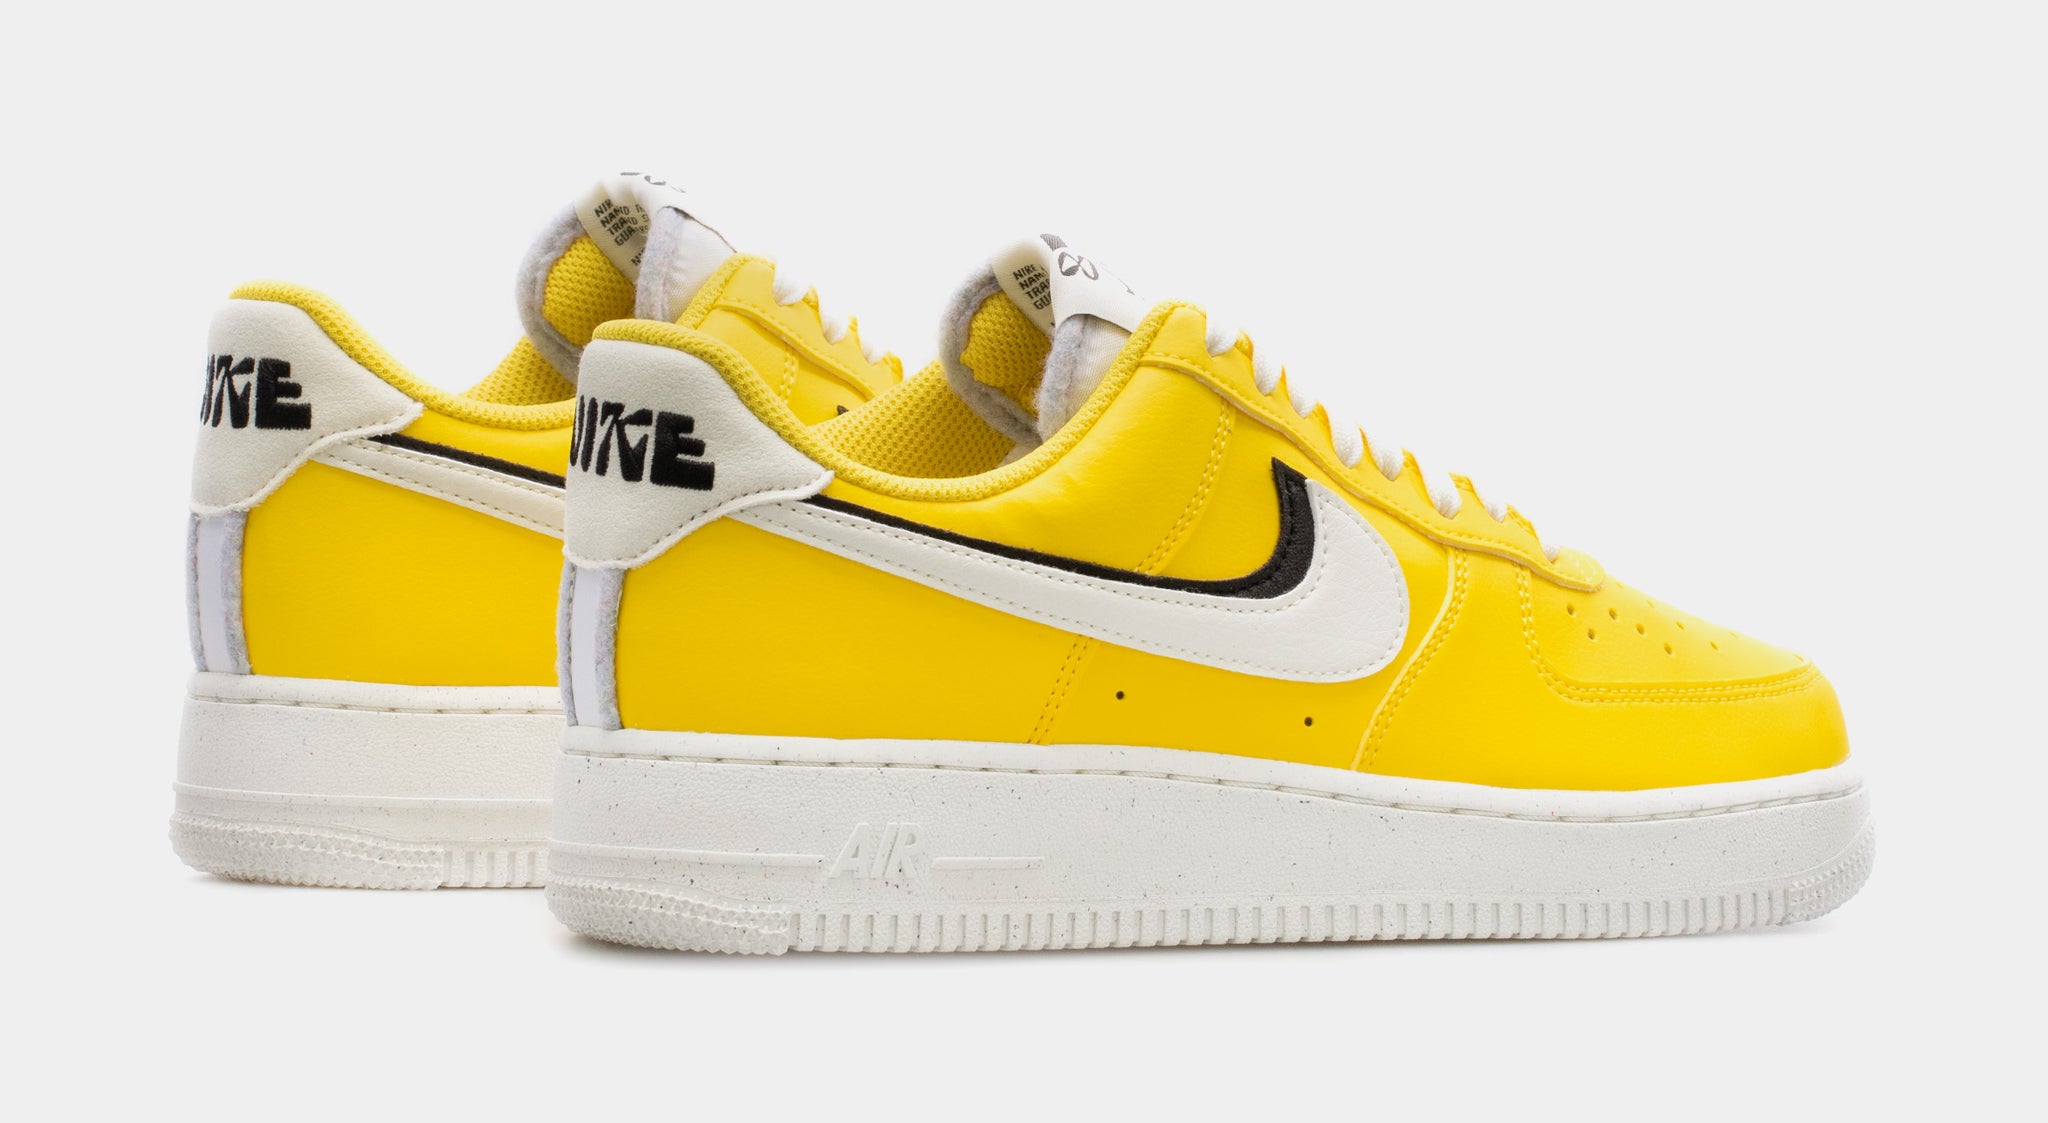 Nike Air Force 1 Low 82 - Where to Buy